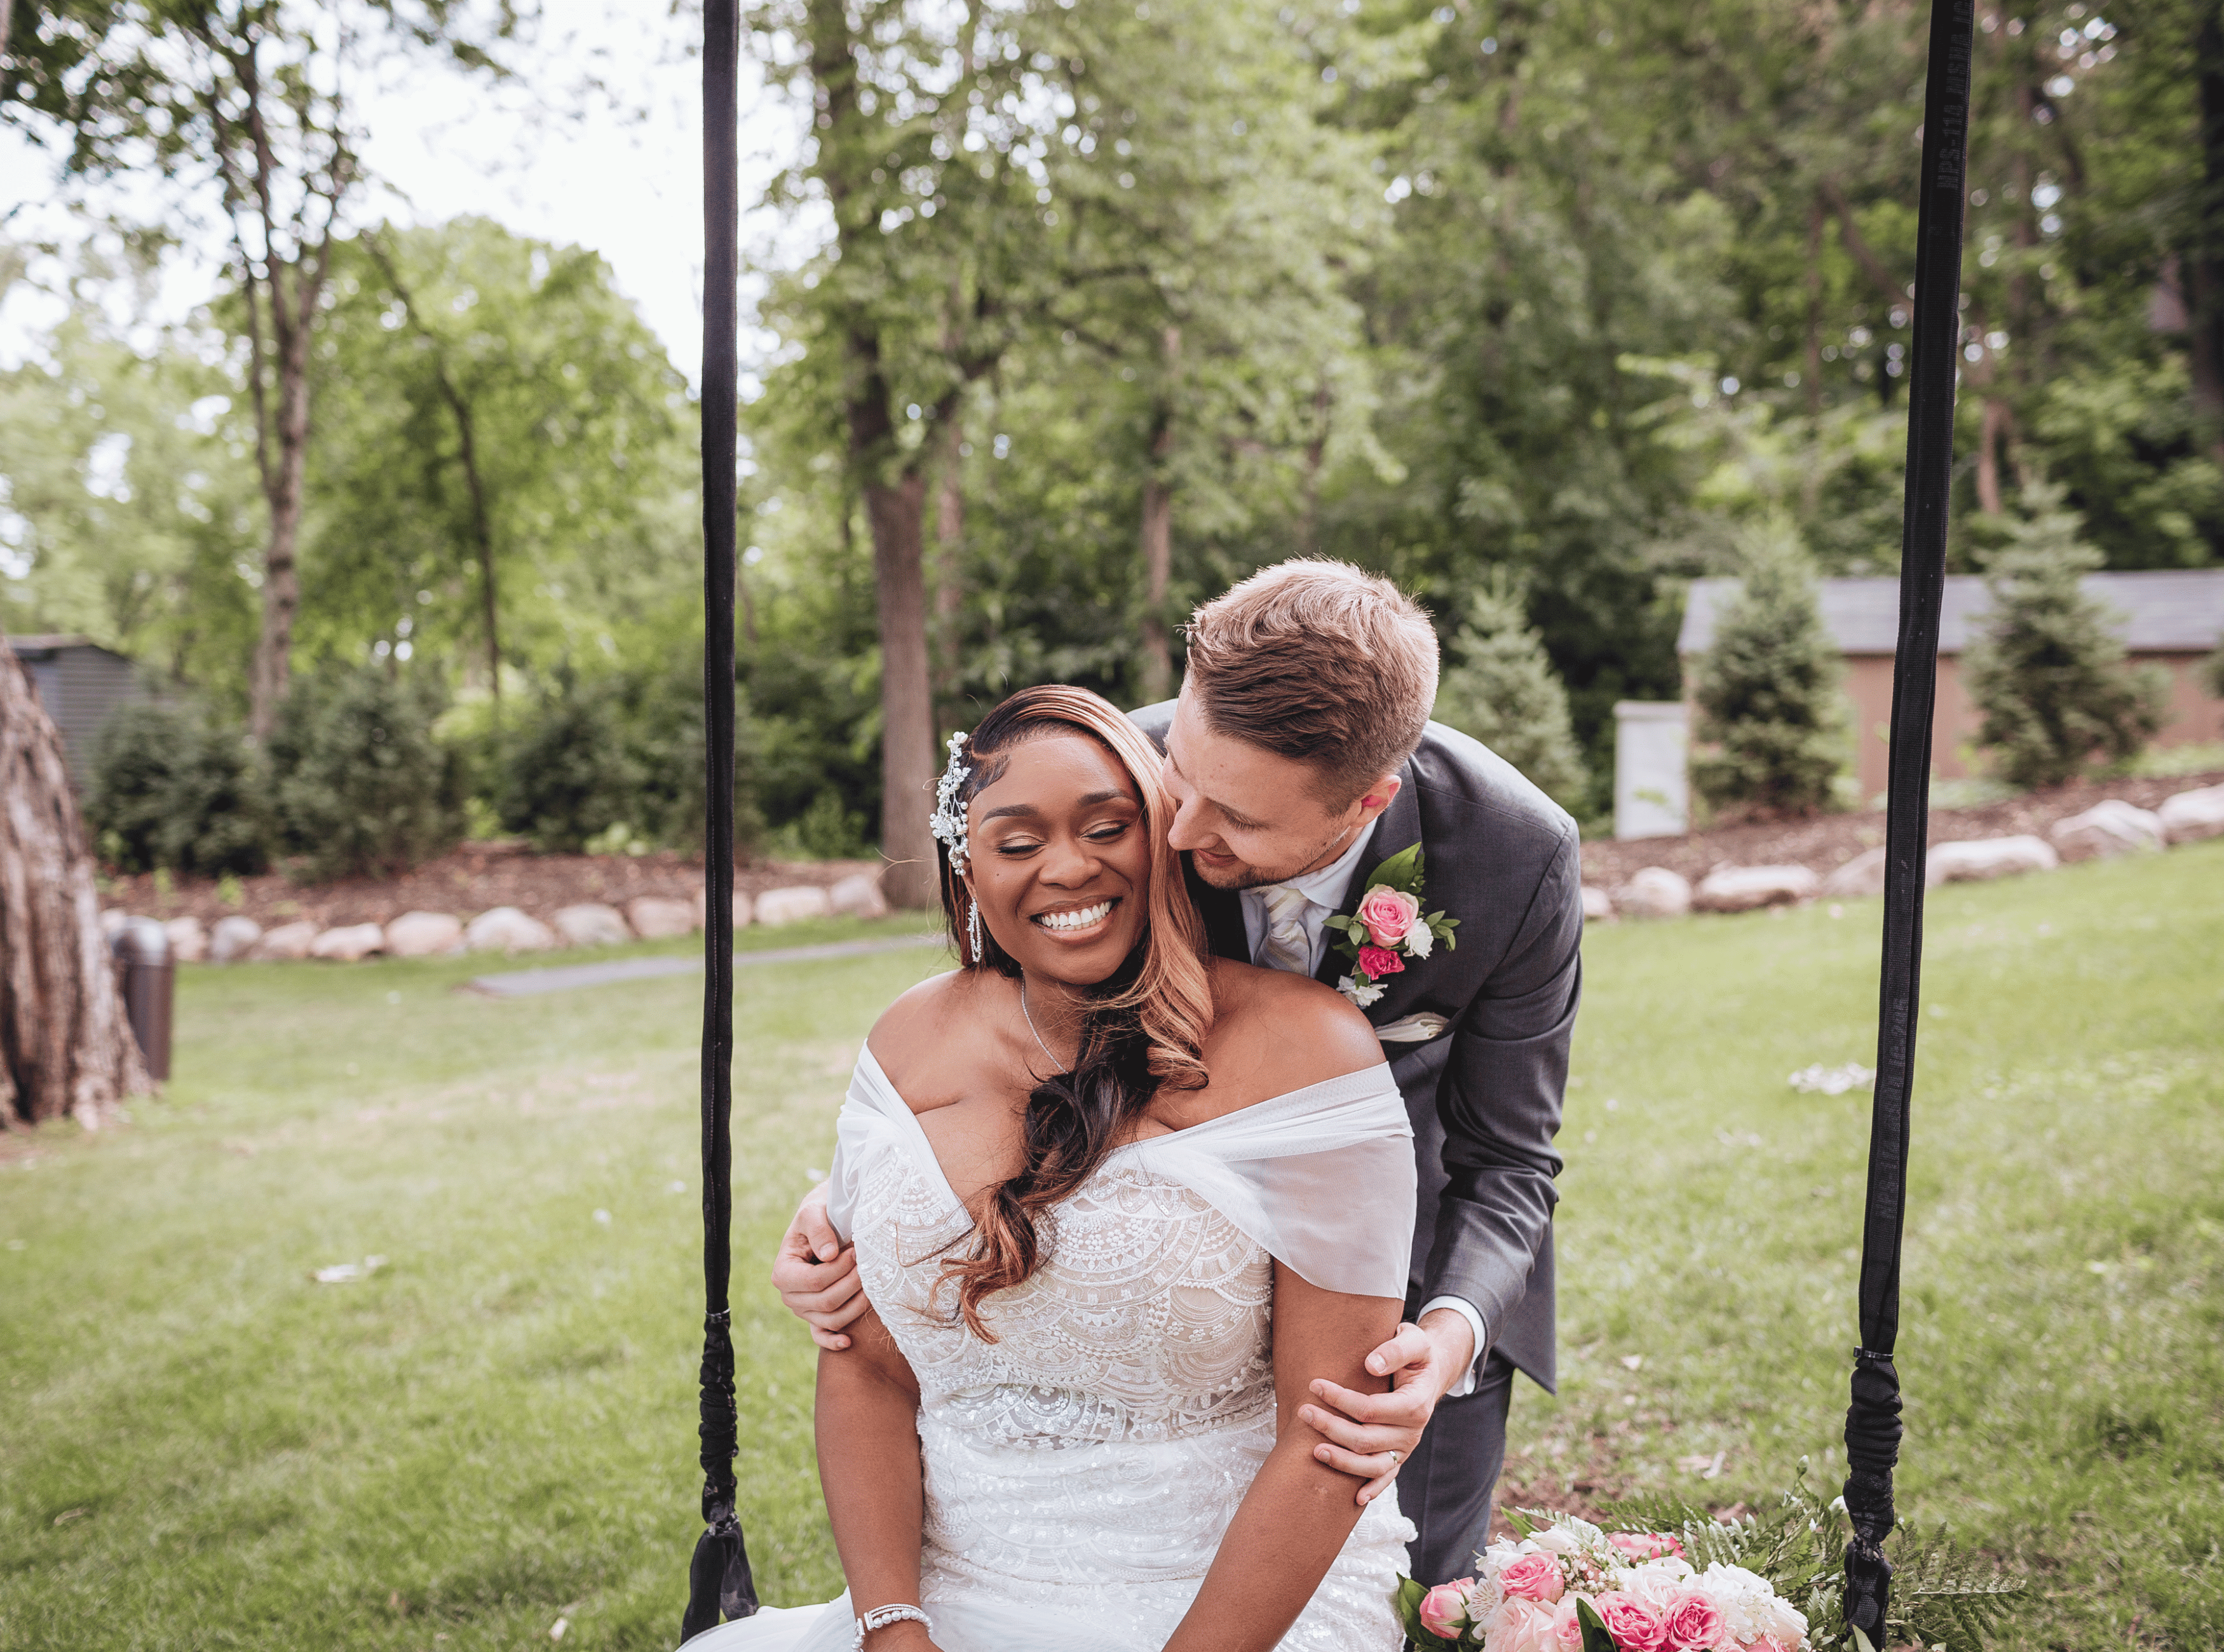 3 Easy Date Night Ideas for Couples, St. Louis Wedding Photographer